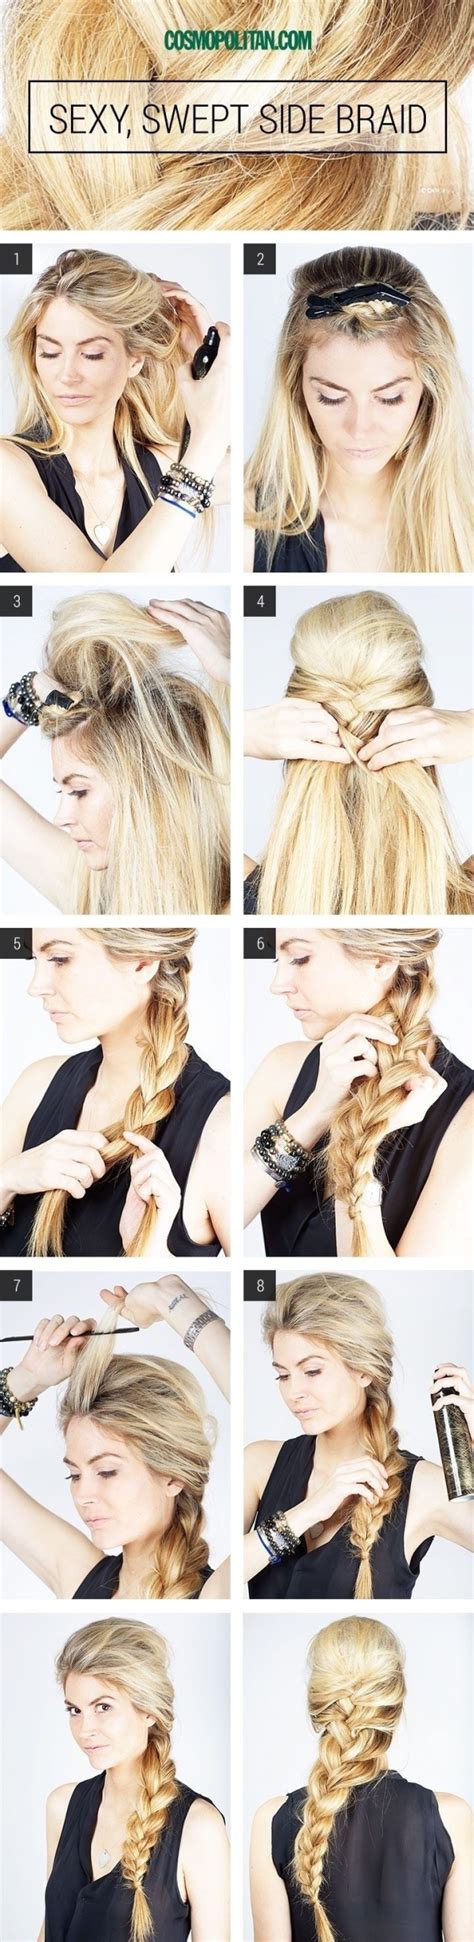 If you have a party or a wedding coming up, you can have the easiest and cutest look of the night by pairing your gorgeous evening gown with one little lace braid hidden somewhere in the rest of your hair. 21. Swept Side Braid for Long Hair - 43 Fancy Braided ...